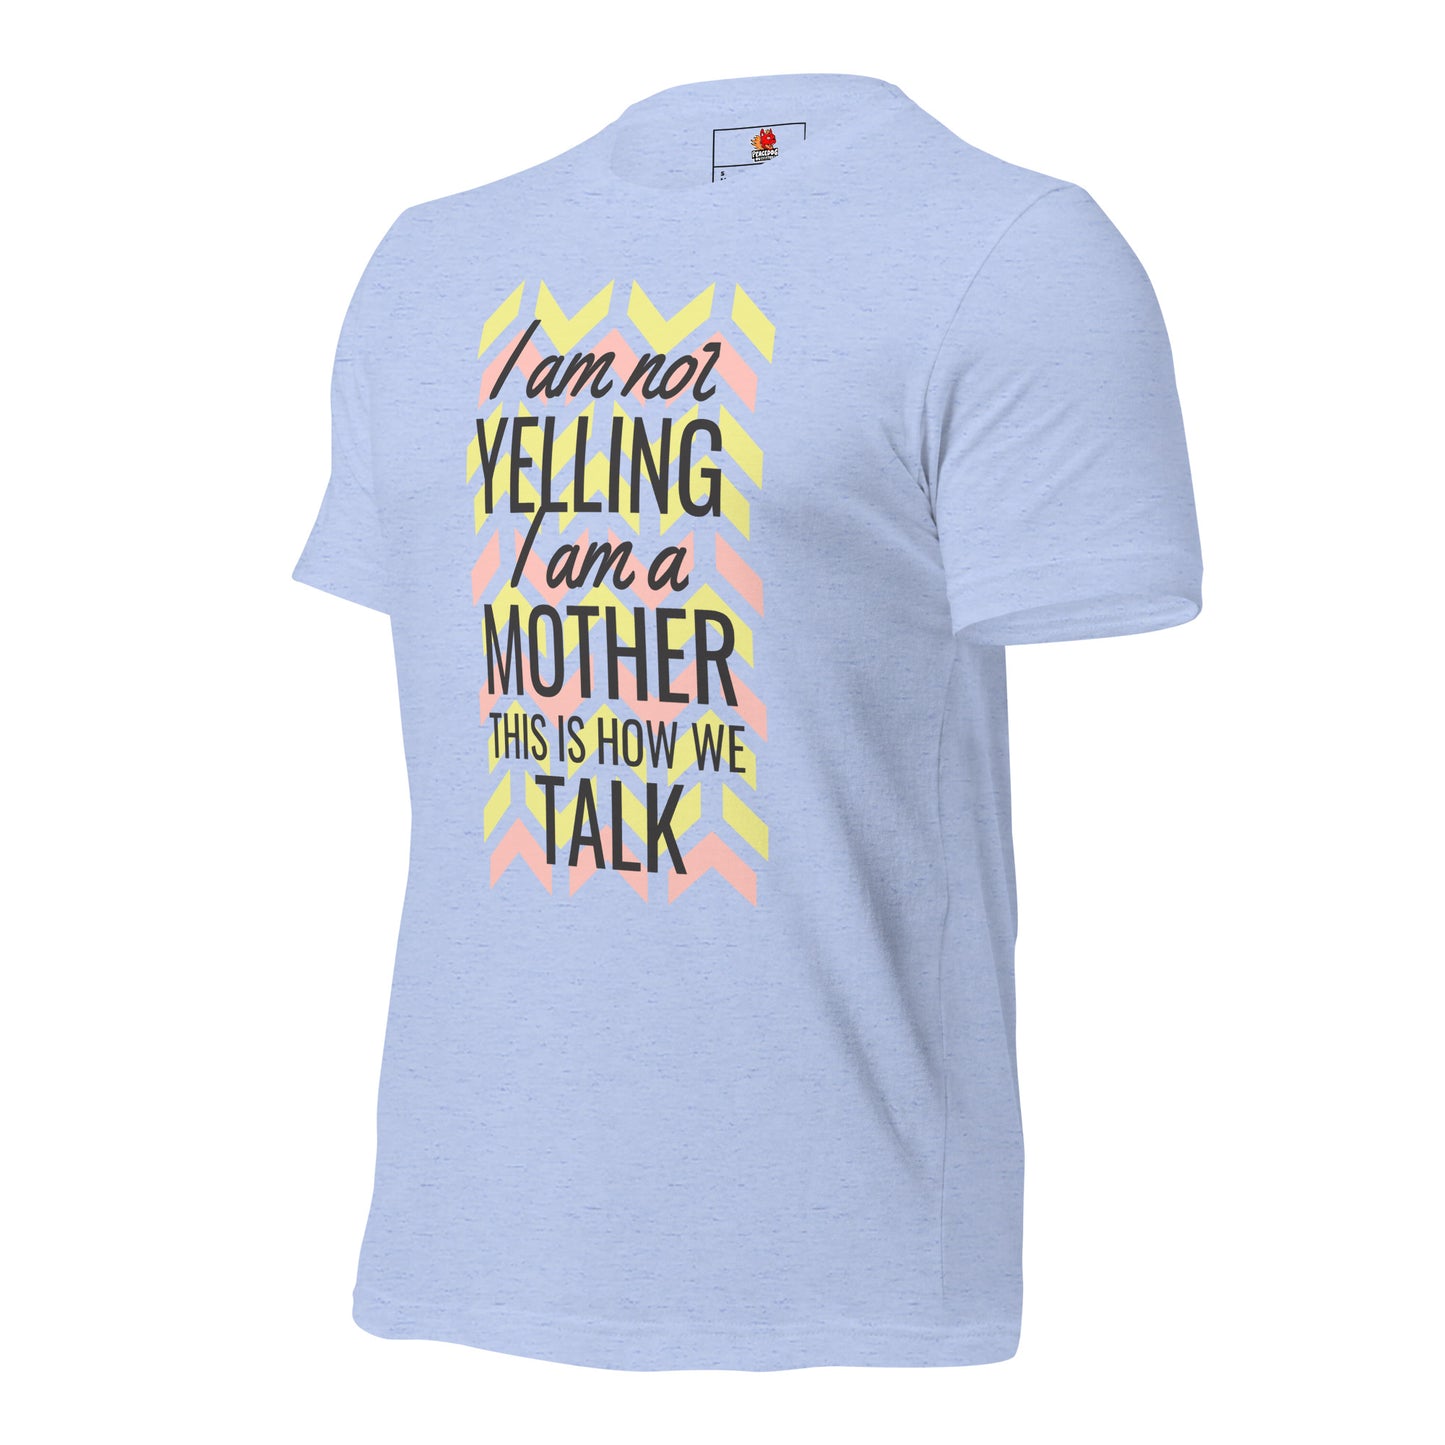 I am not yelling. I'm a mother... T-Shirt